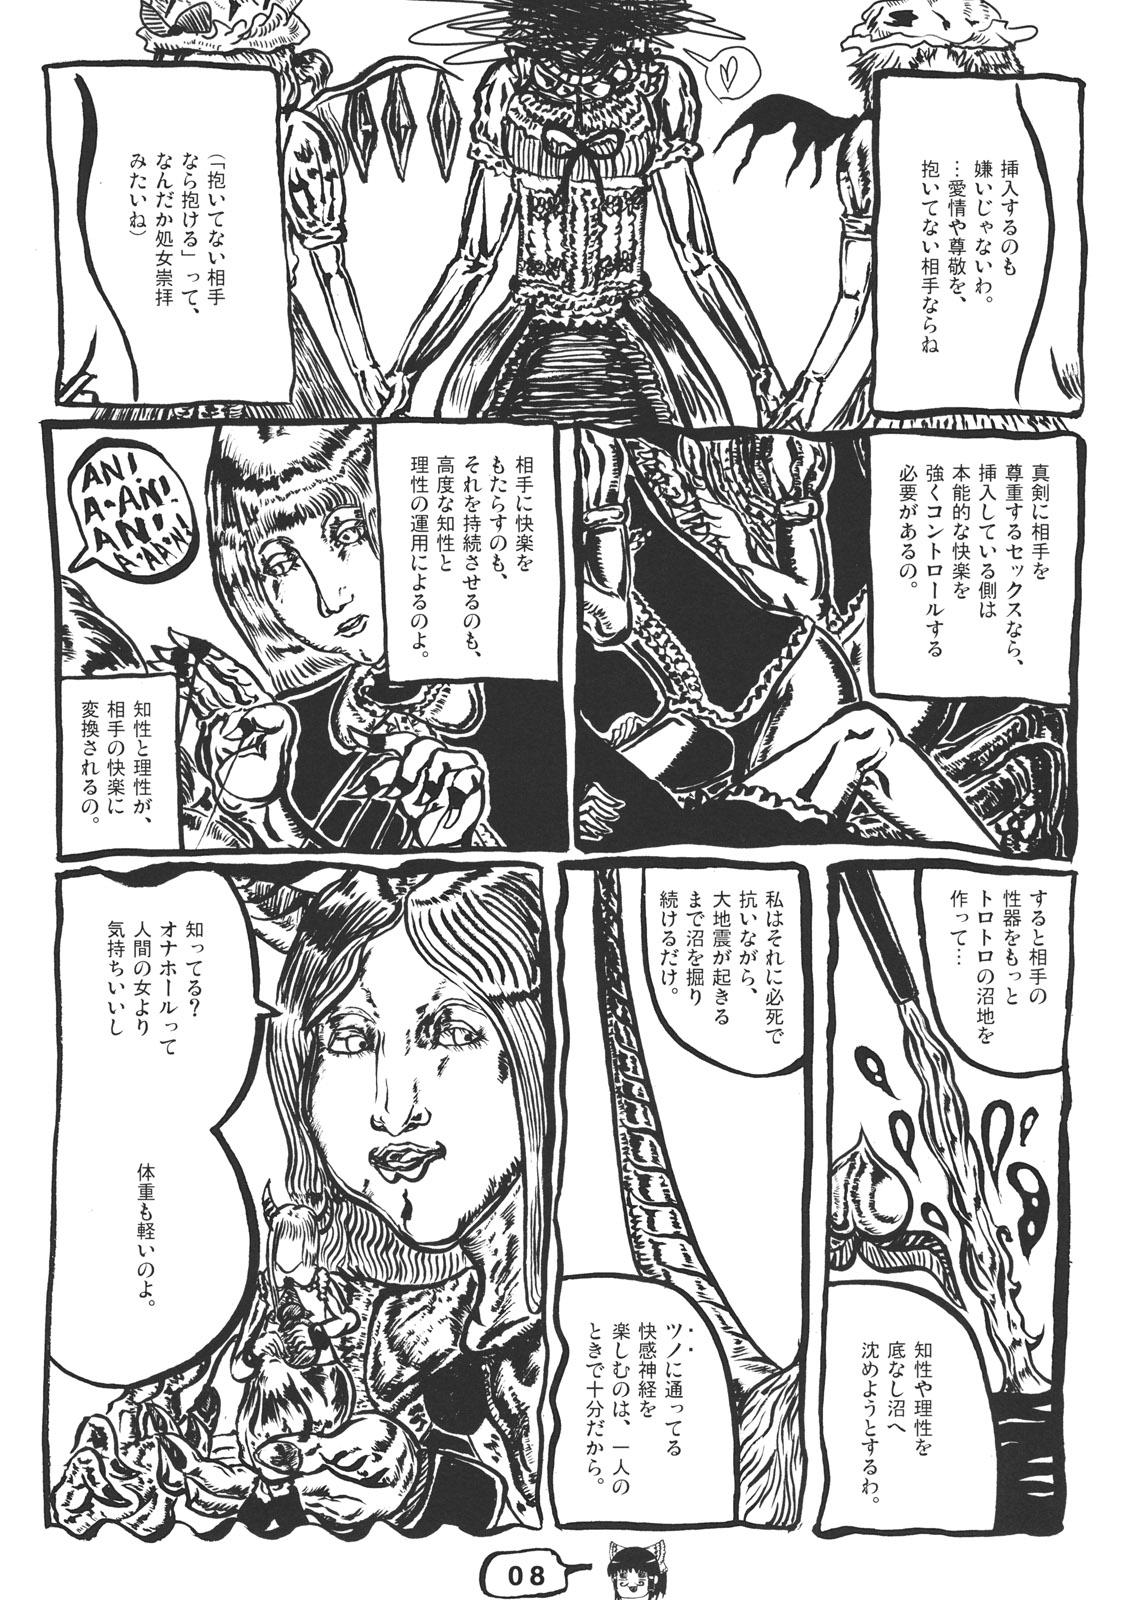 Hardcore CJDG2 - Touhou project Pussy Licking - Page 8